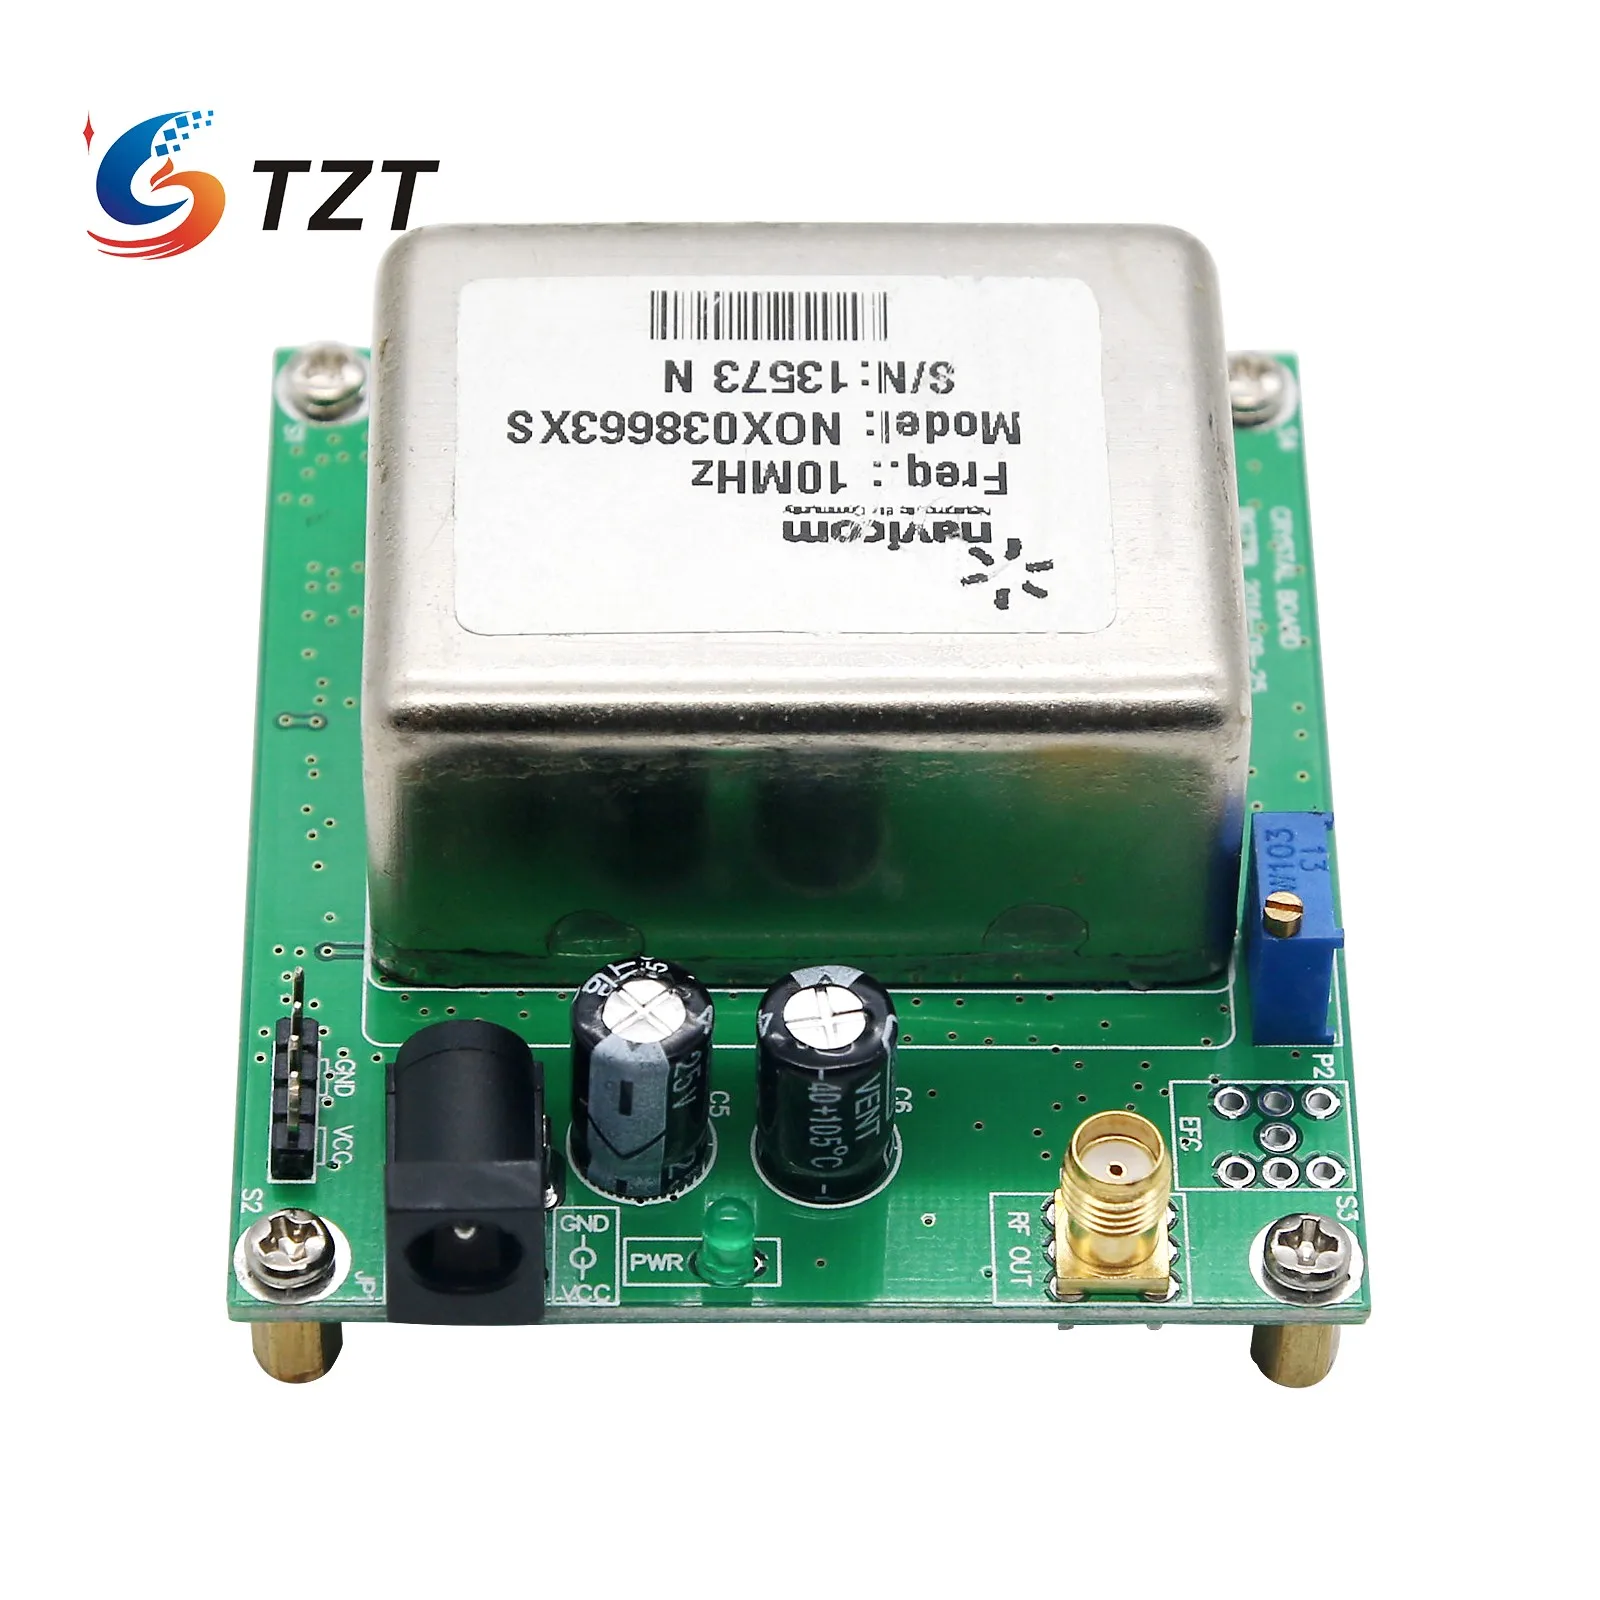 Tzt 10mhz Ocxo Crystal Oscillator Frequency Reference With Board - Dac  Module - AliExpress